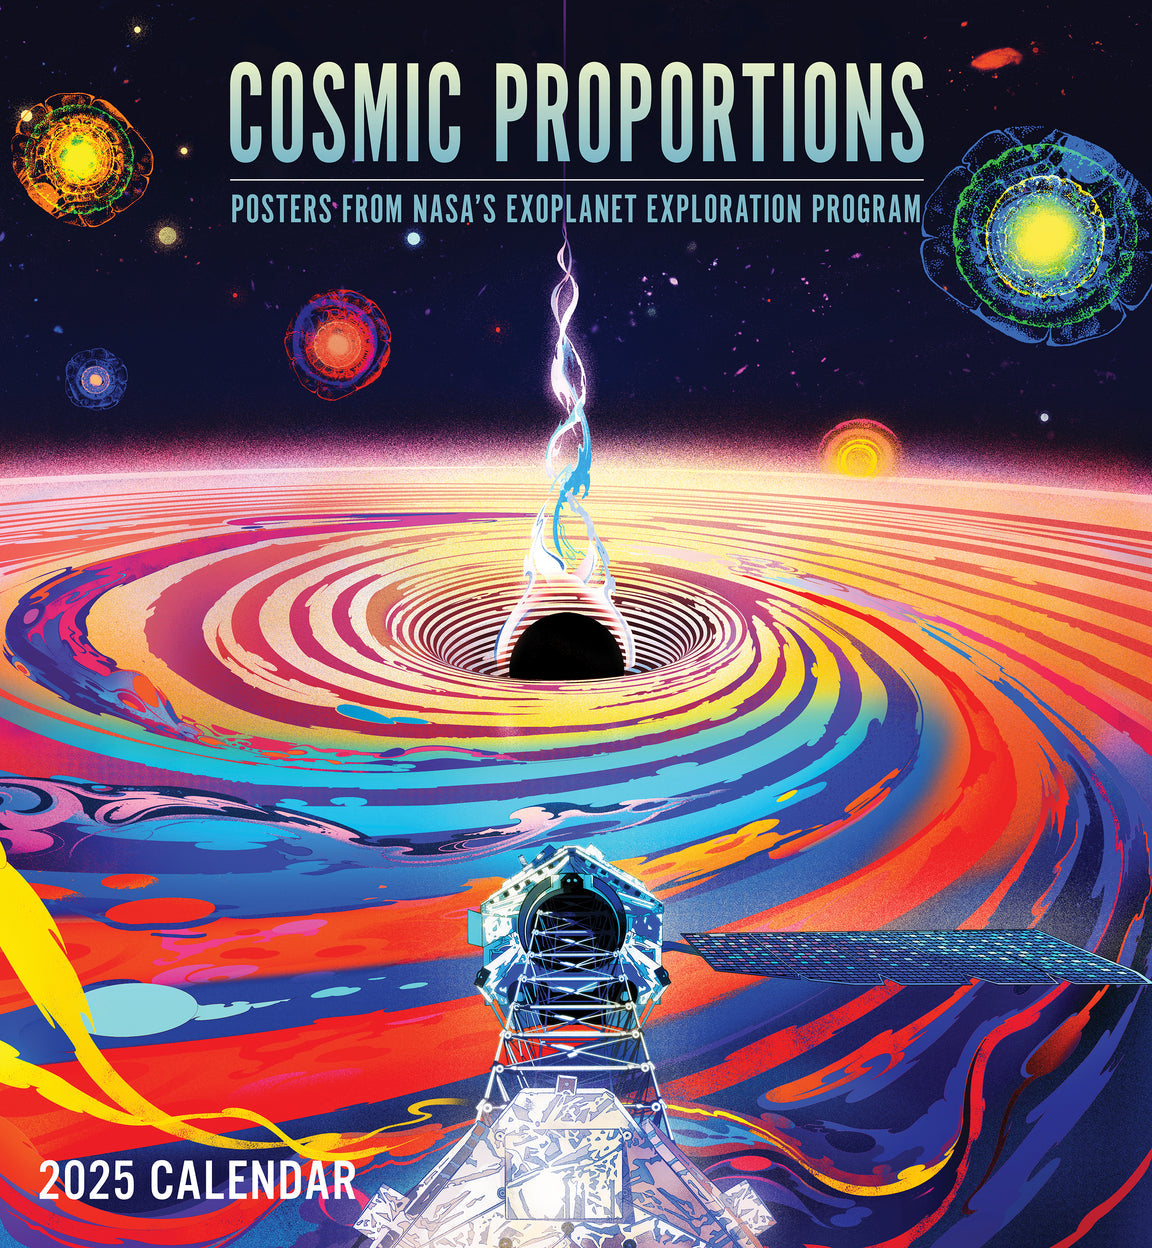 2025 Cosmic Proportions: Posters From NASA s Exoplanet Exploration Program - Square Wall Calendar